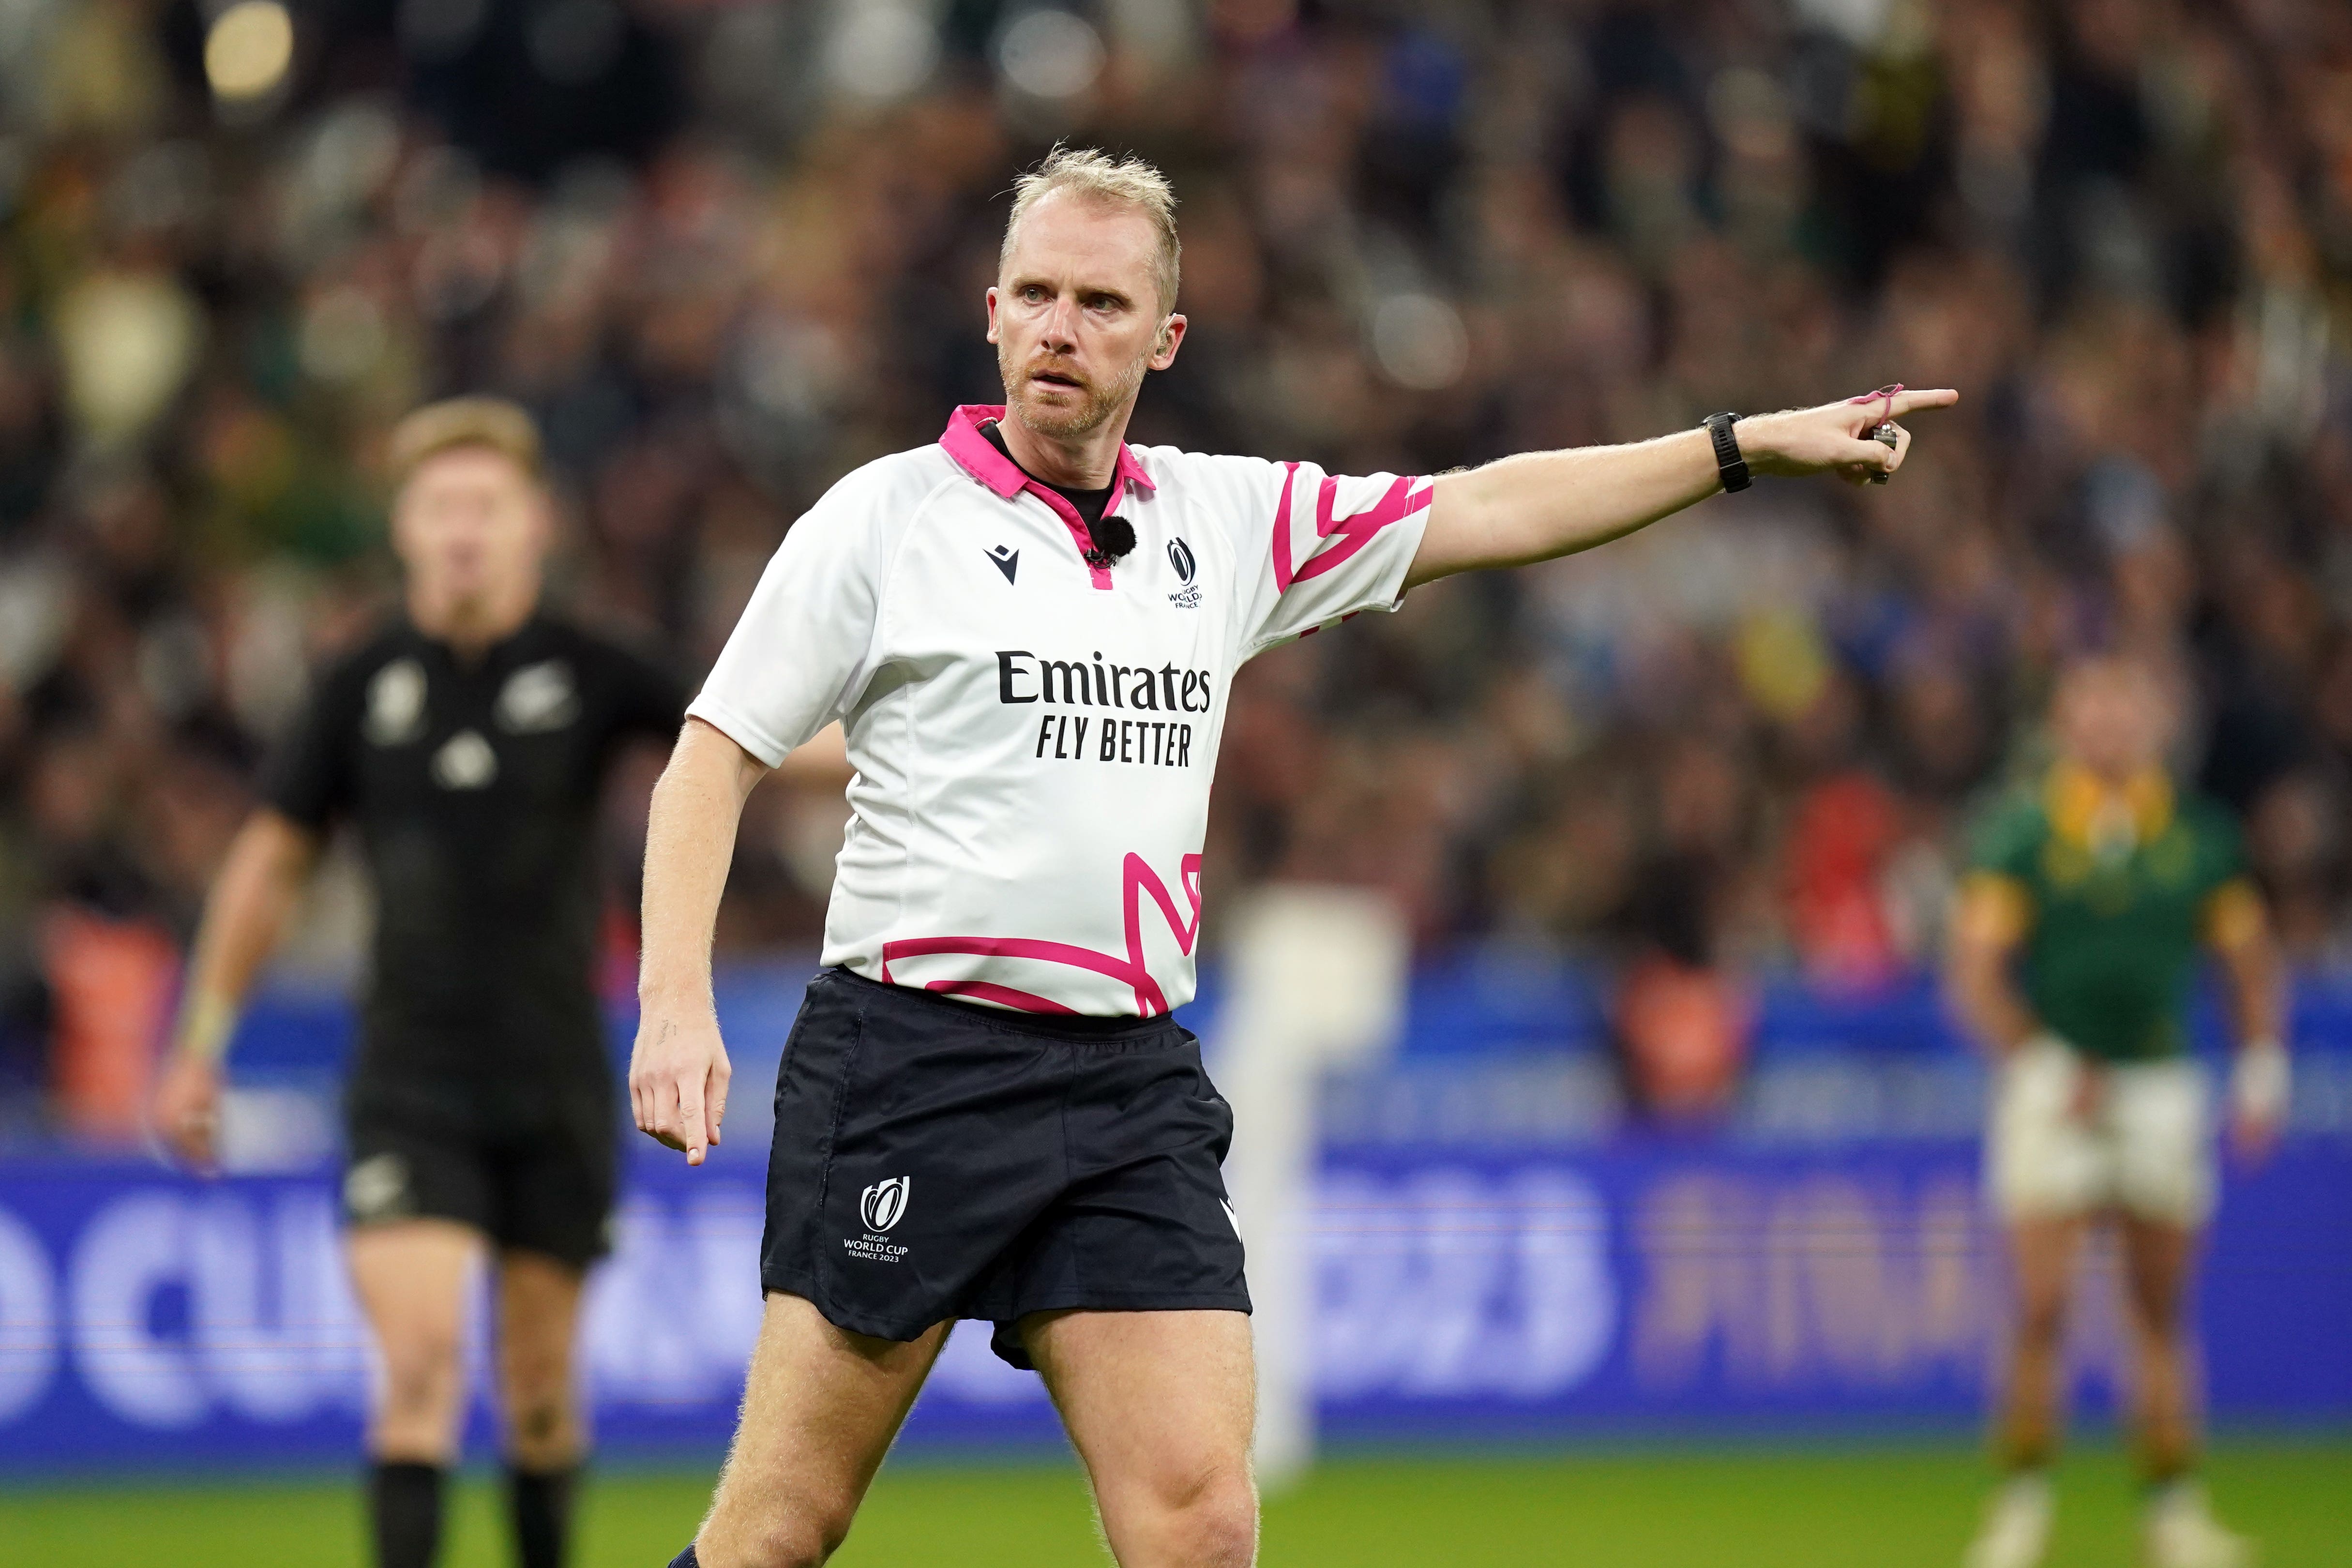 Foley’s compatriot Wayne Barnes retired from refereeing after the World Cup